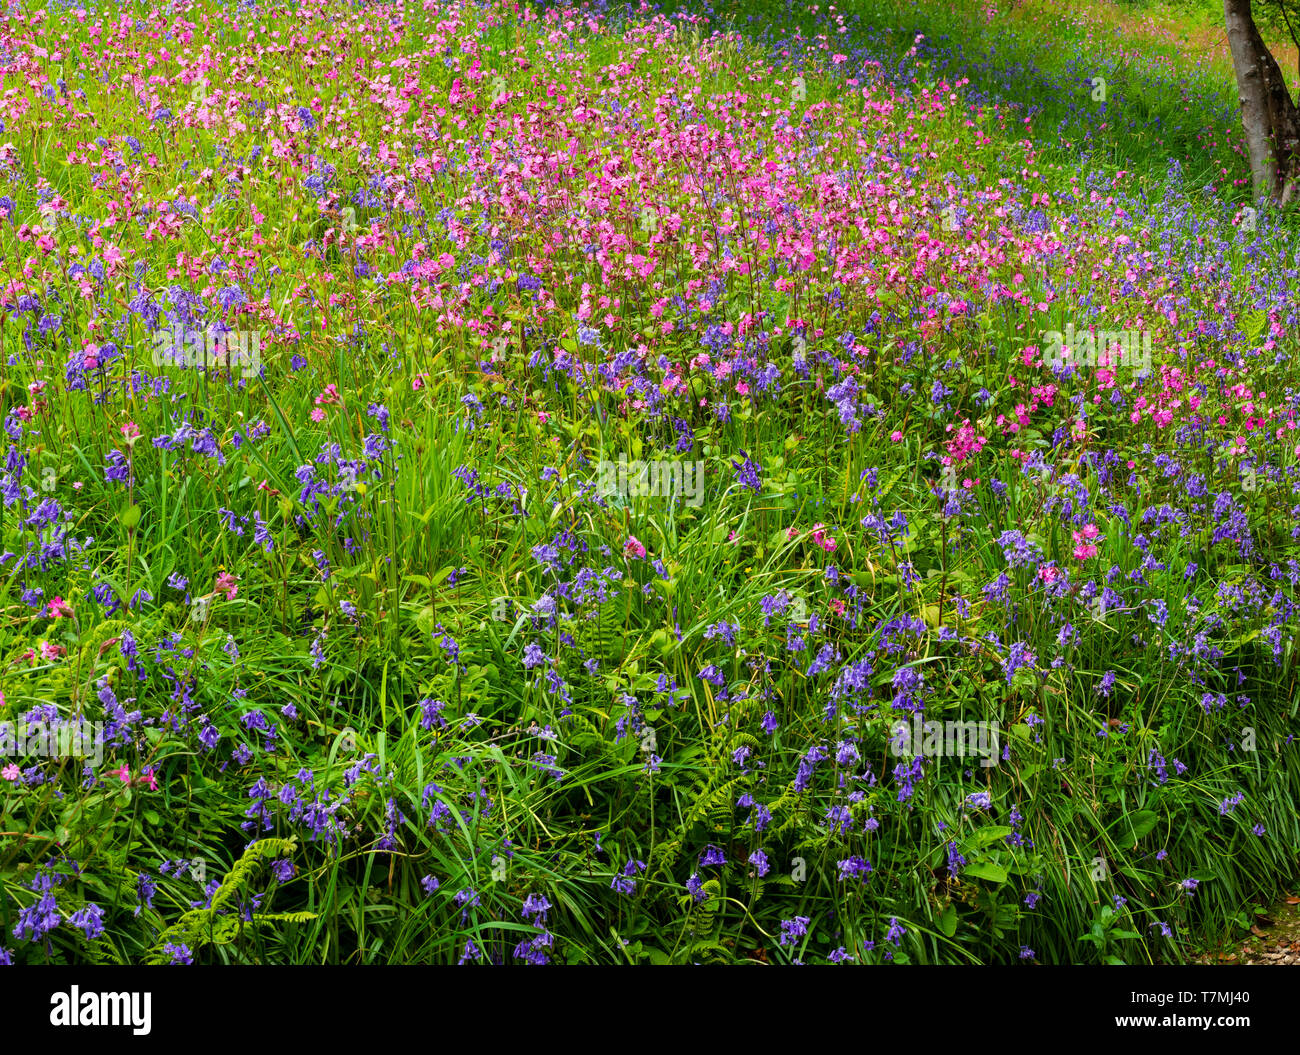 Spring wildflowers, principally bluebells, Hyacinthus non-scriptus, and red campion, Silene dioica, on a Devon woodland bank Stock Photo